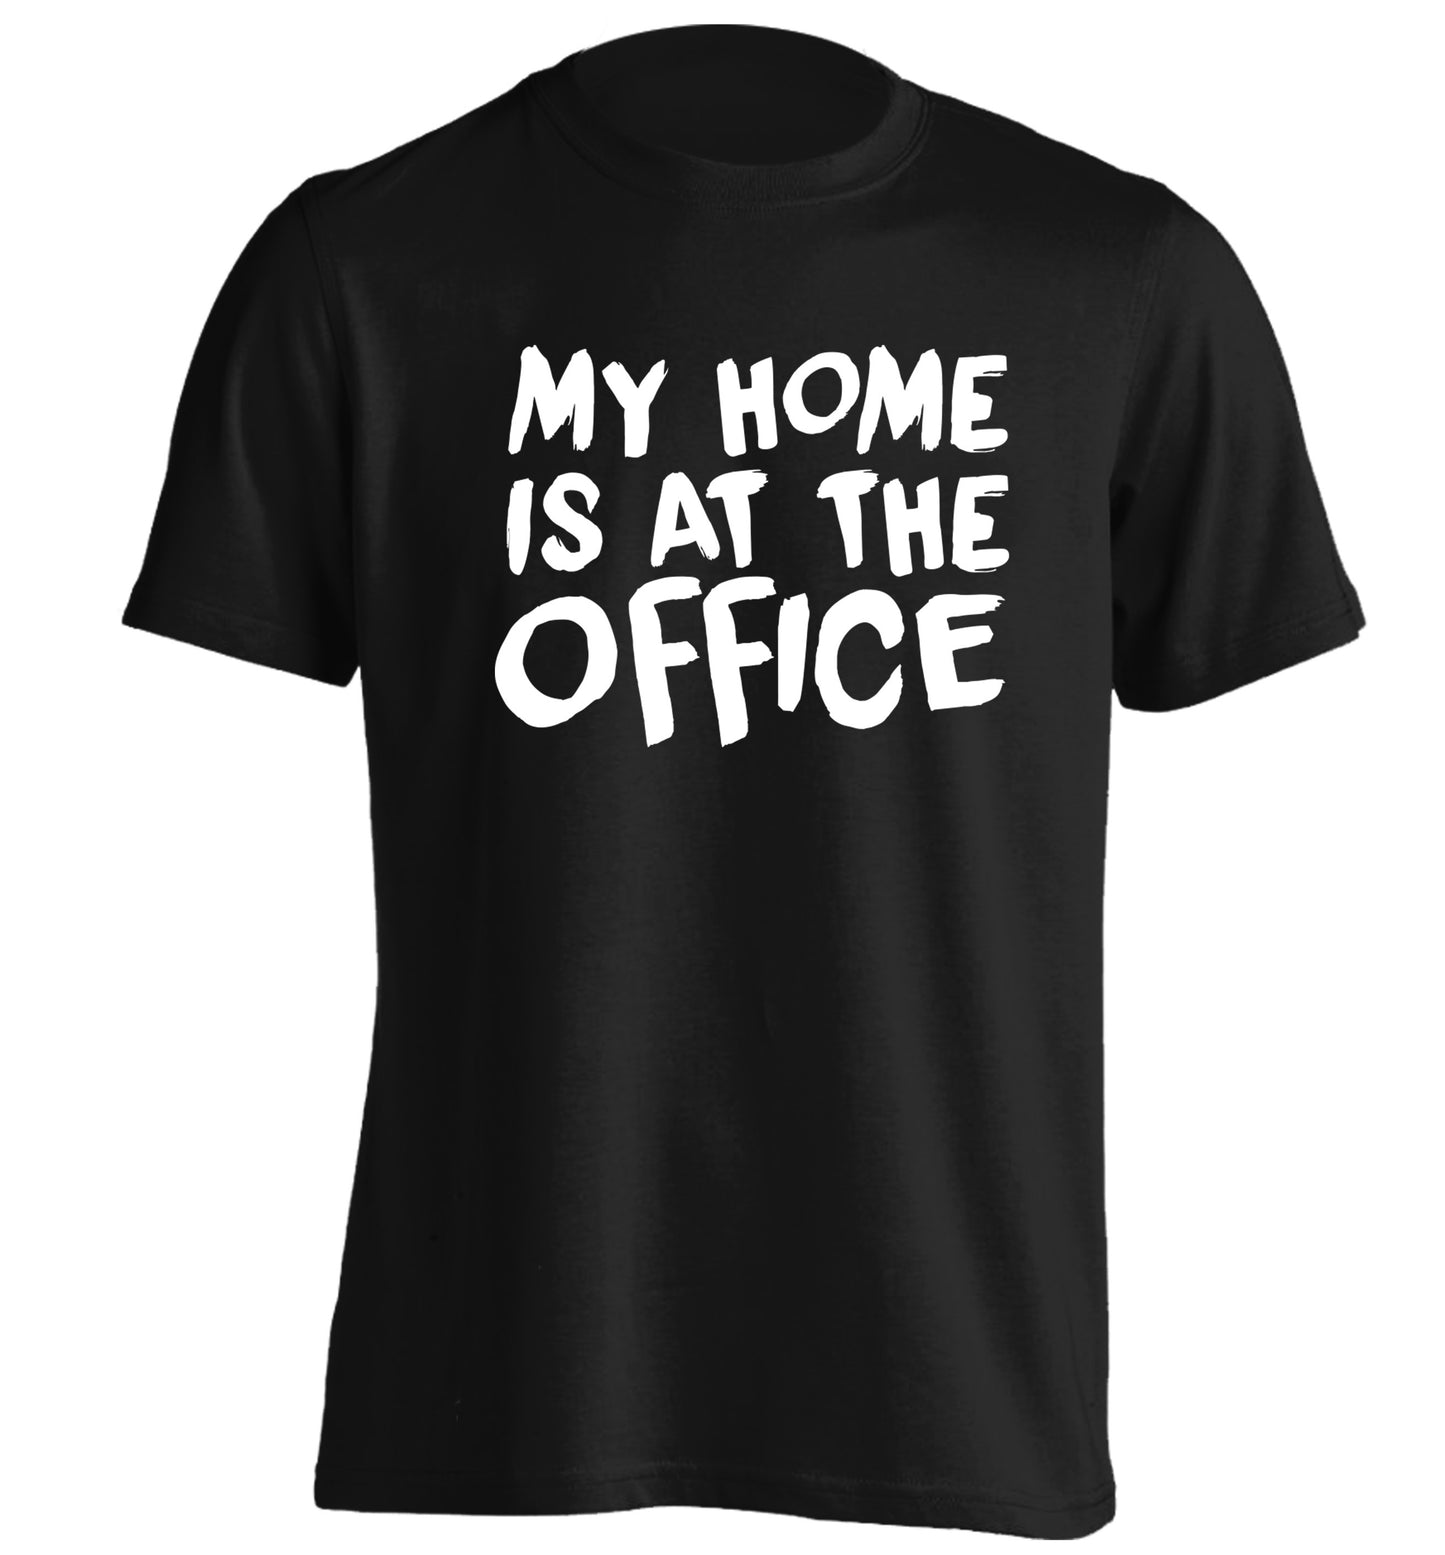 My home is at the office adults unisex black Tshirt 2XL